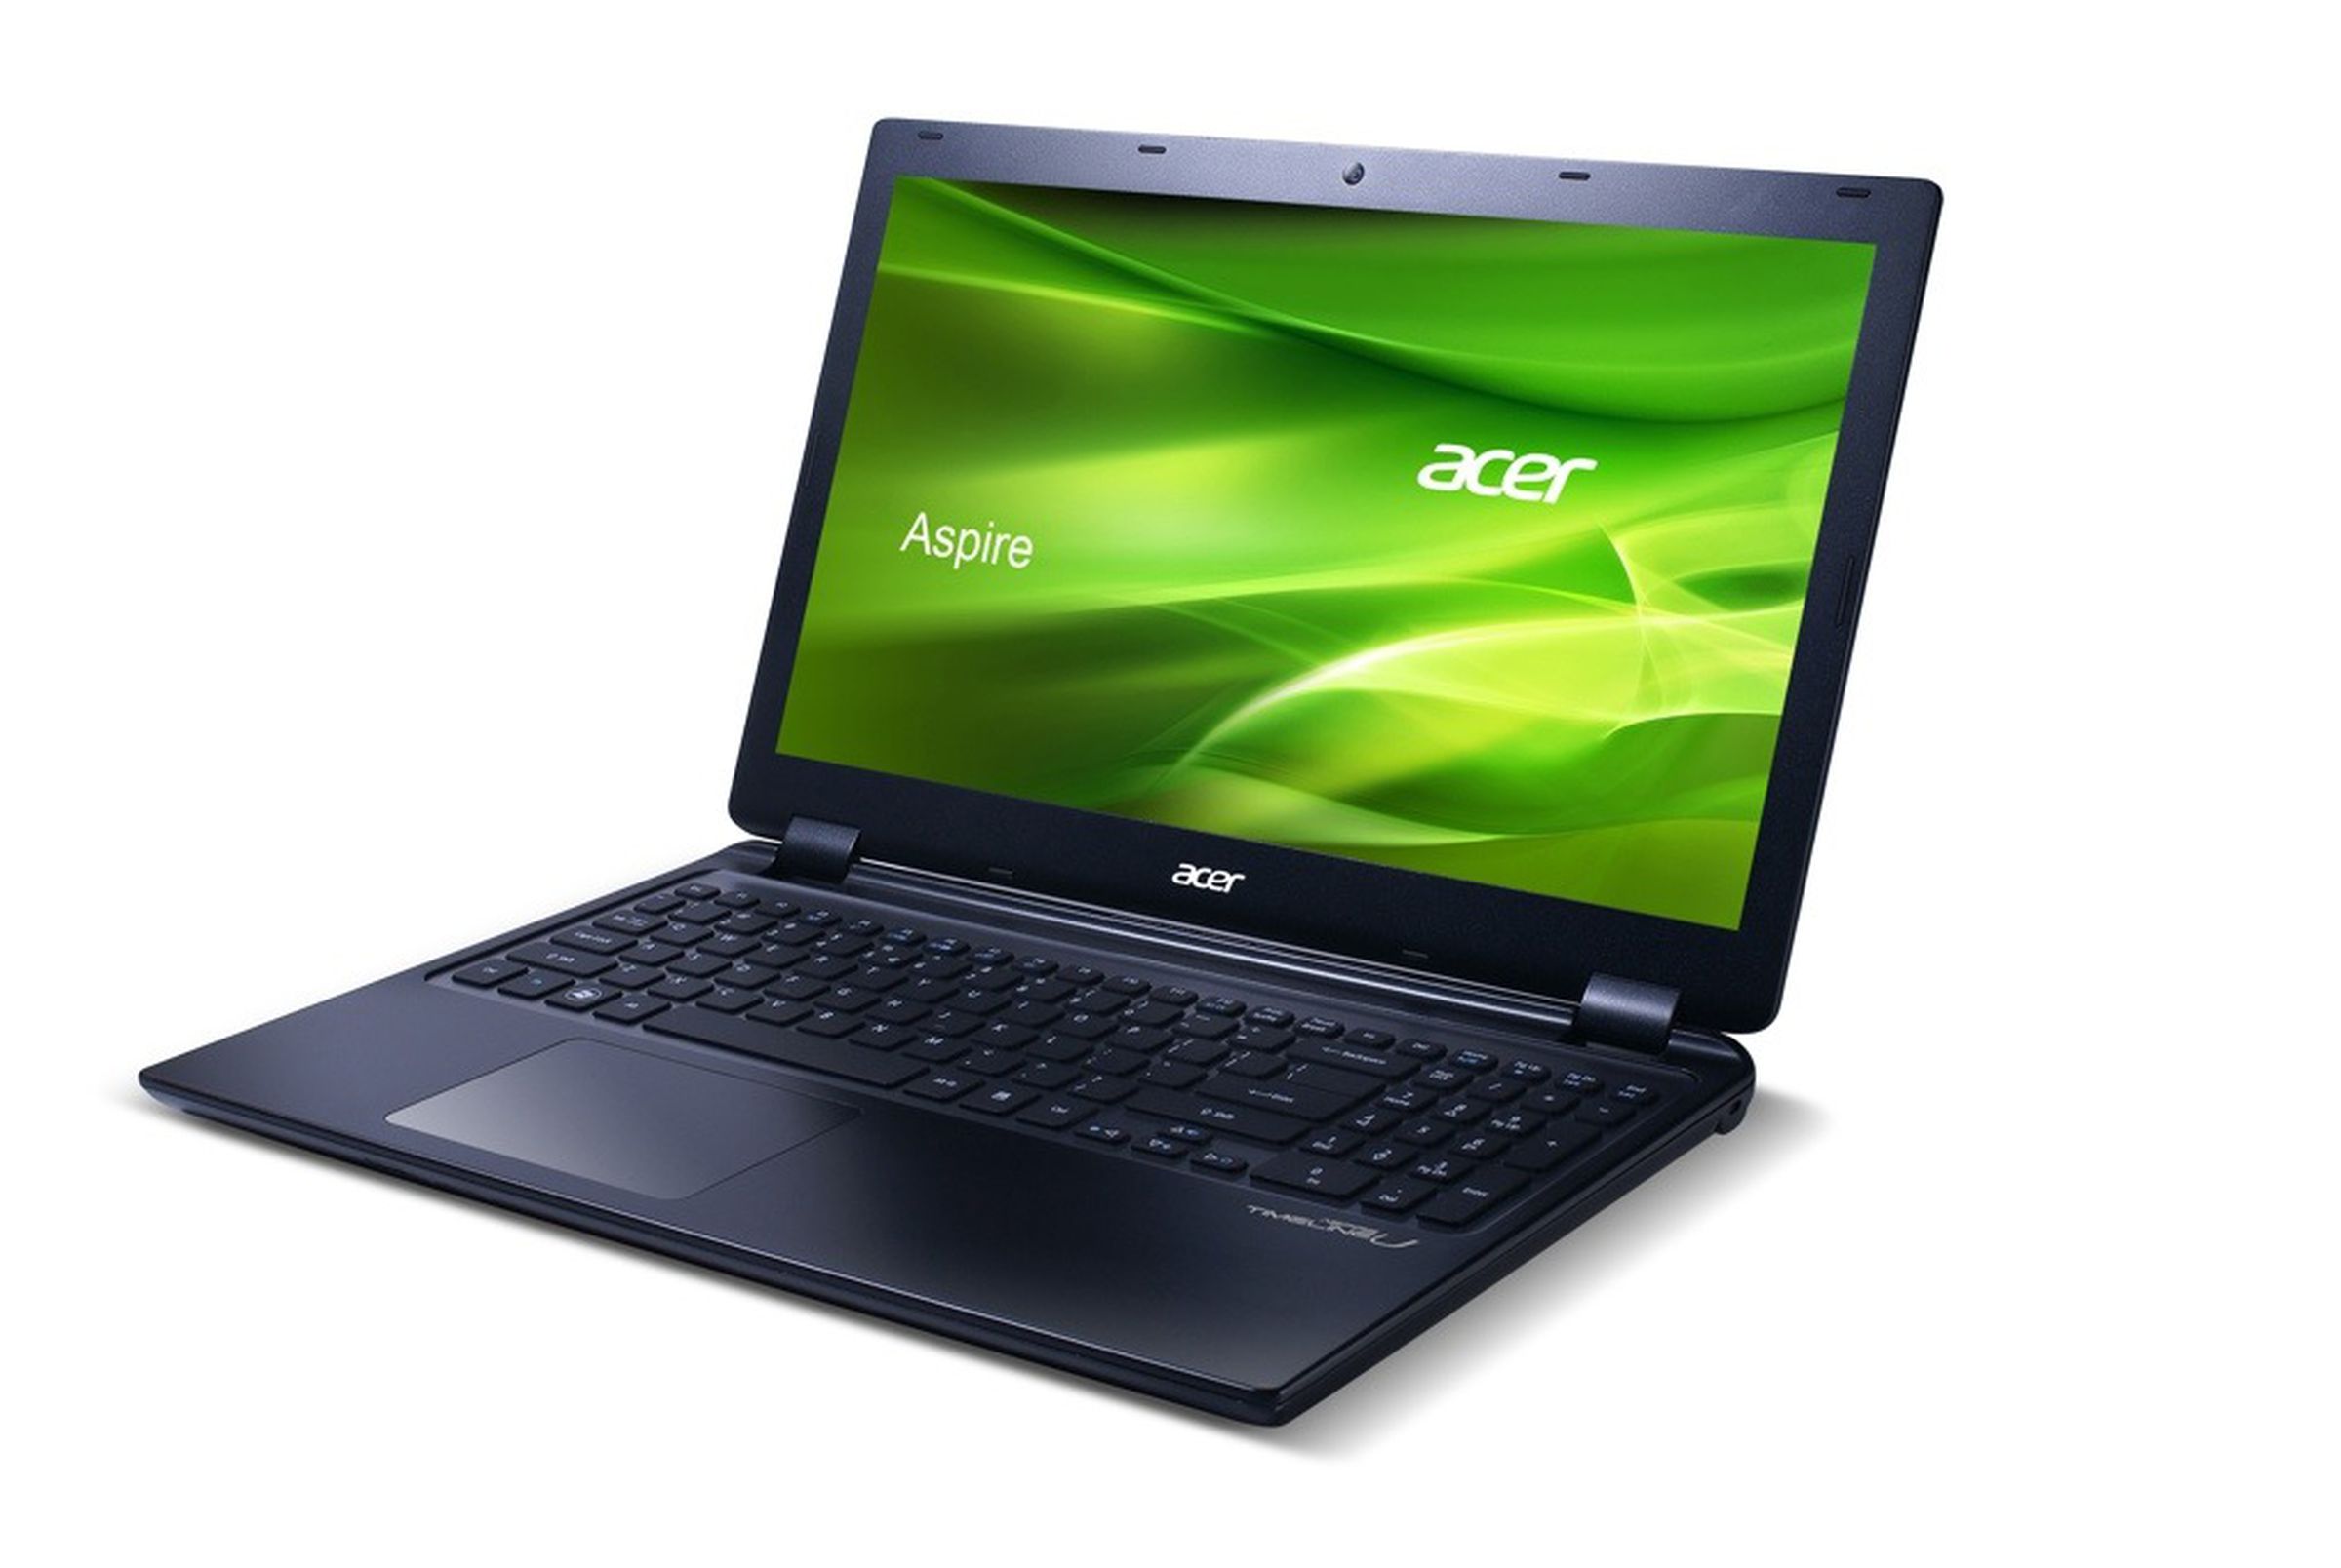 Acer Aspire Timeline Ultra M3 touch press pictures